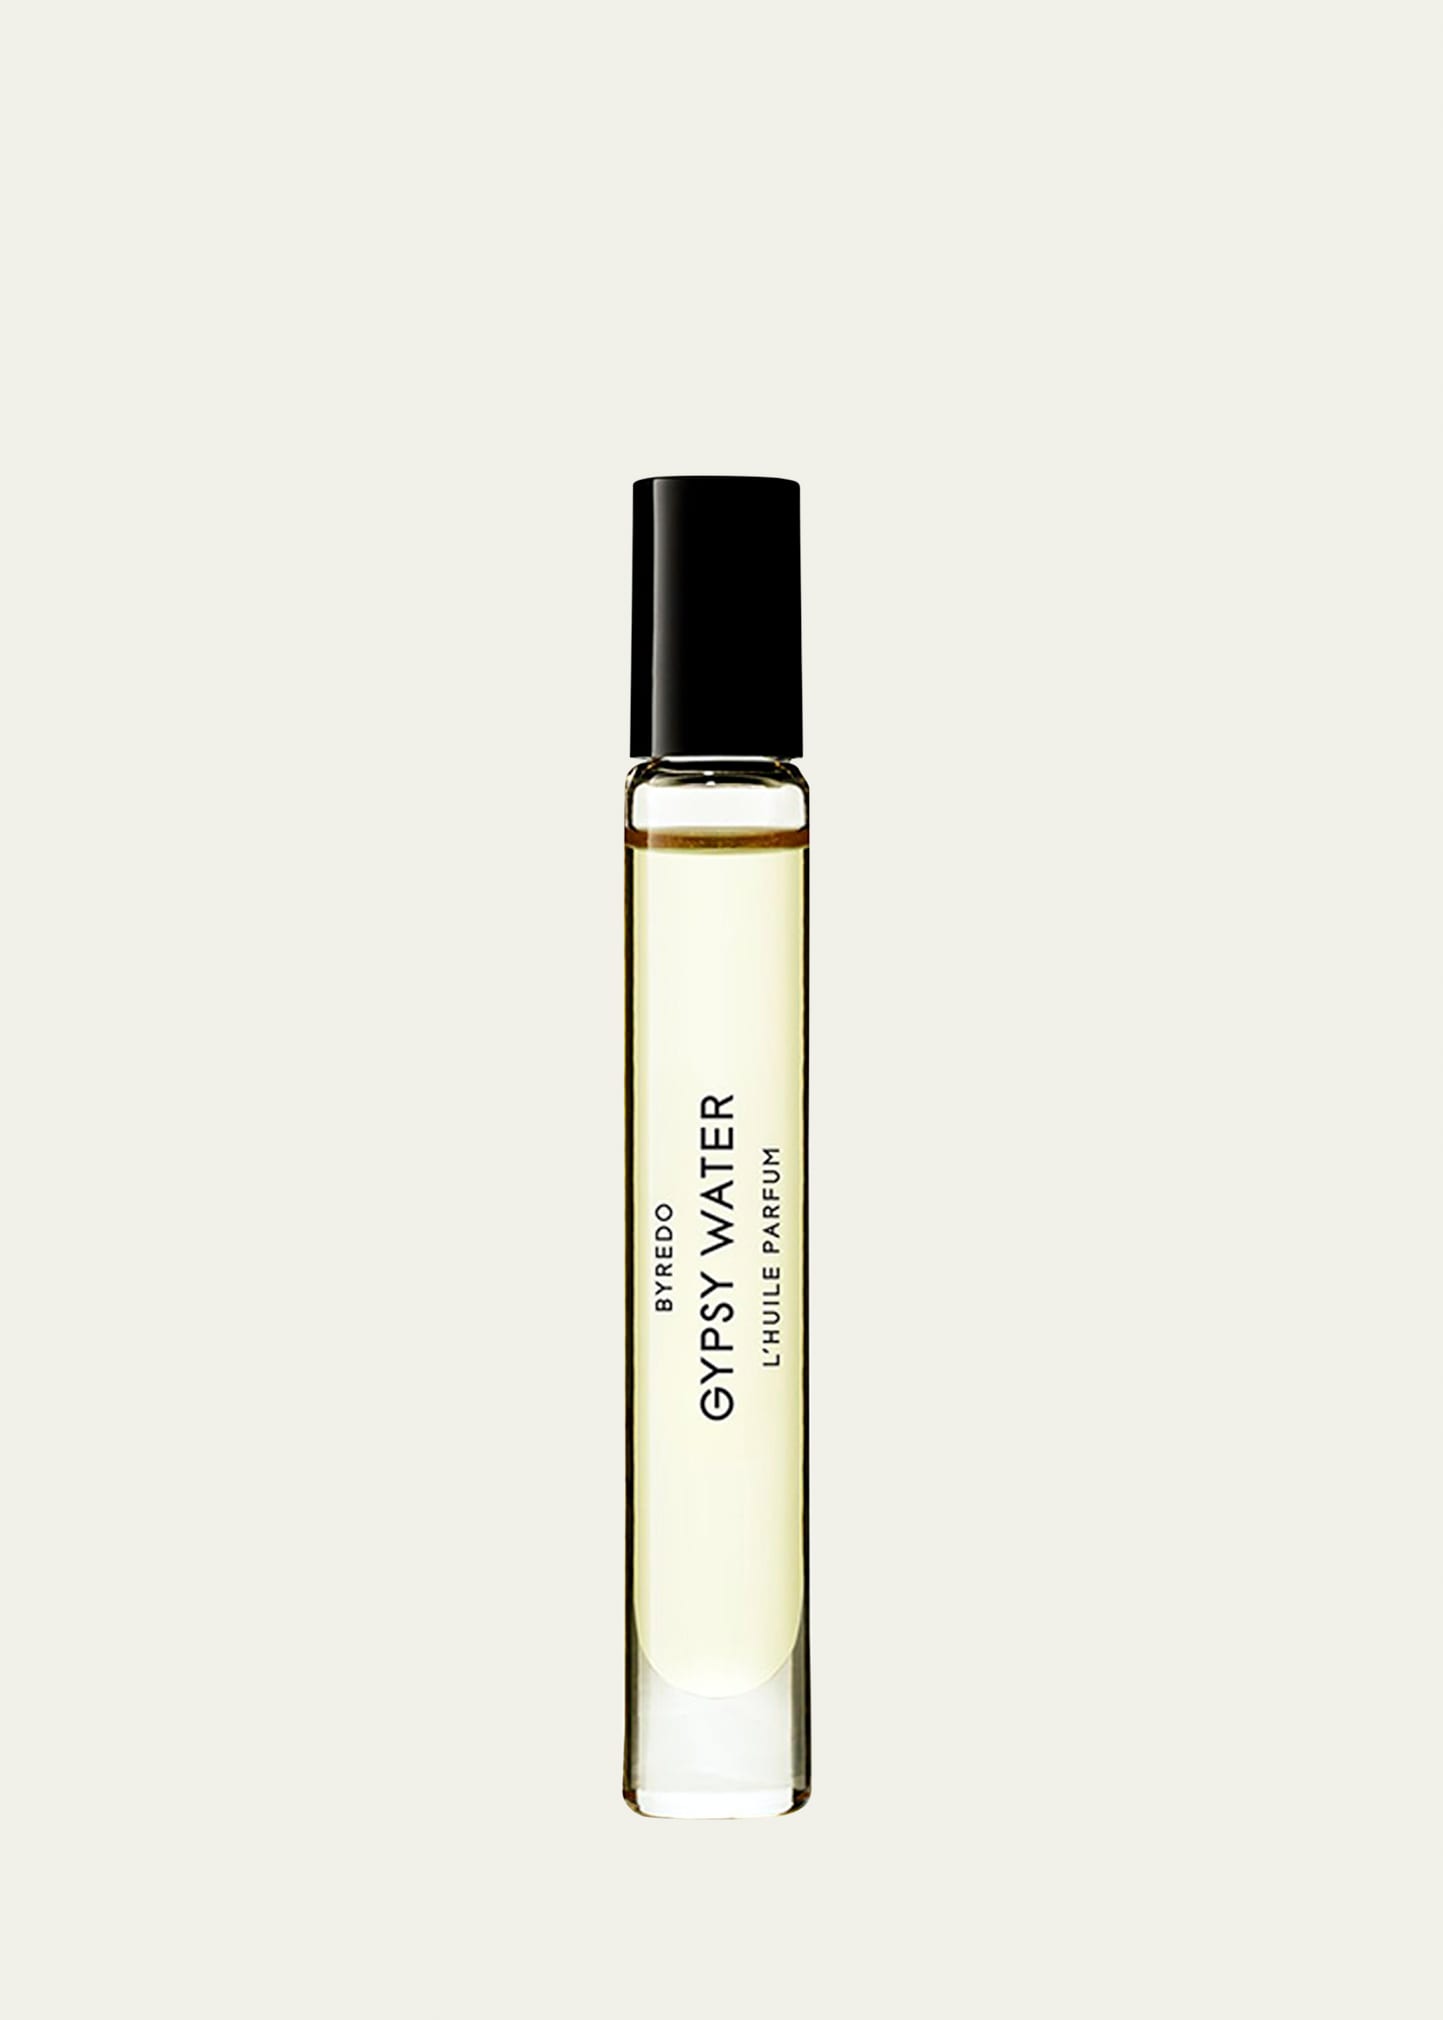 Gypsy Water L'Huile Parfum Oil Roll-On, 0.25 oz.